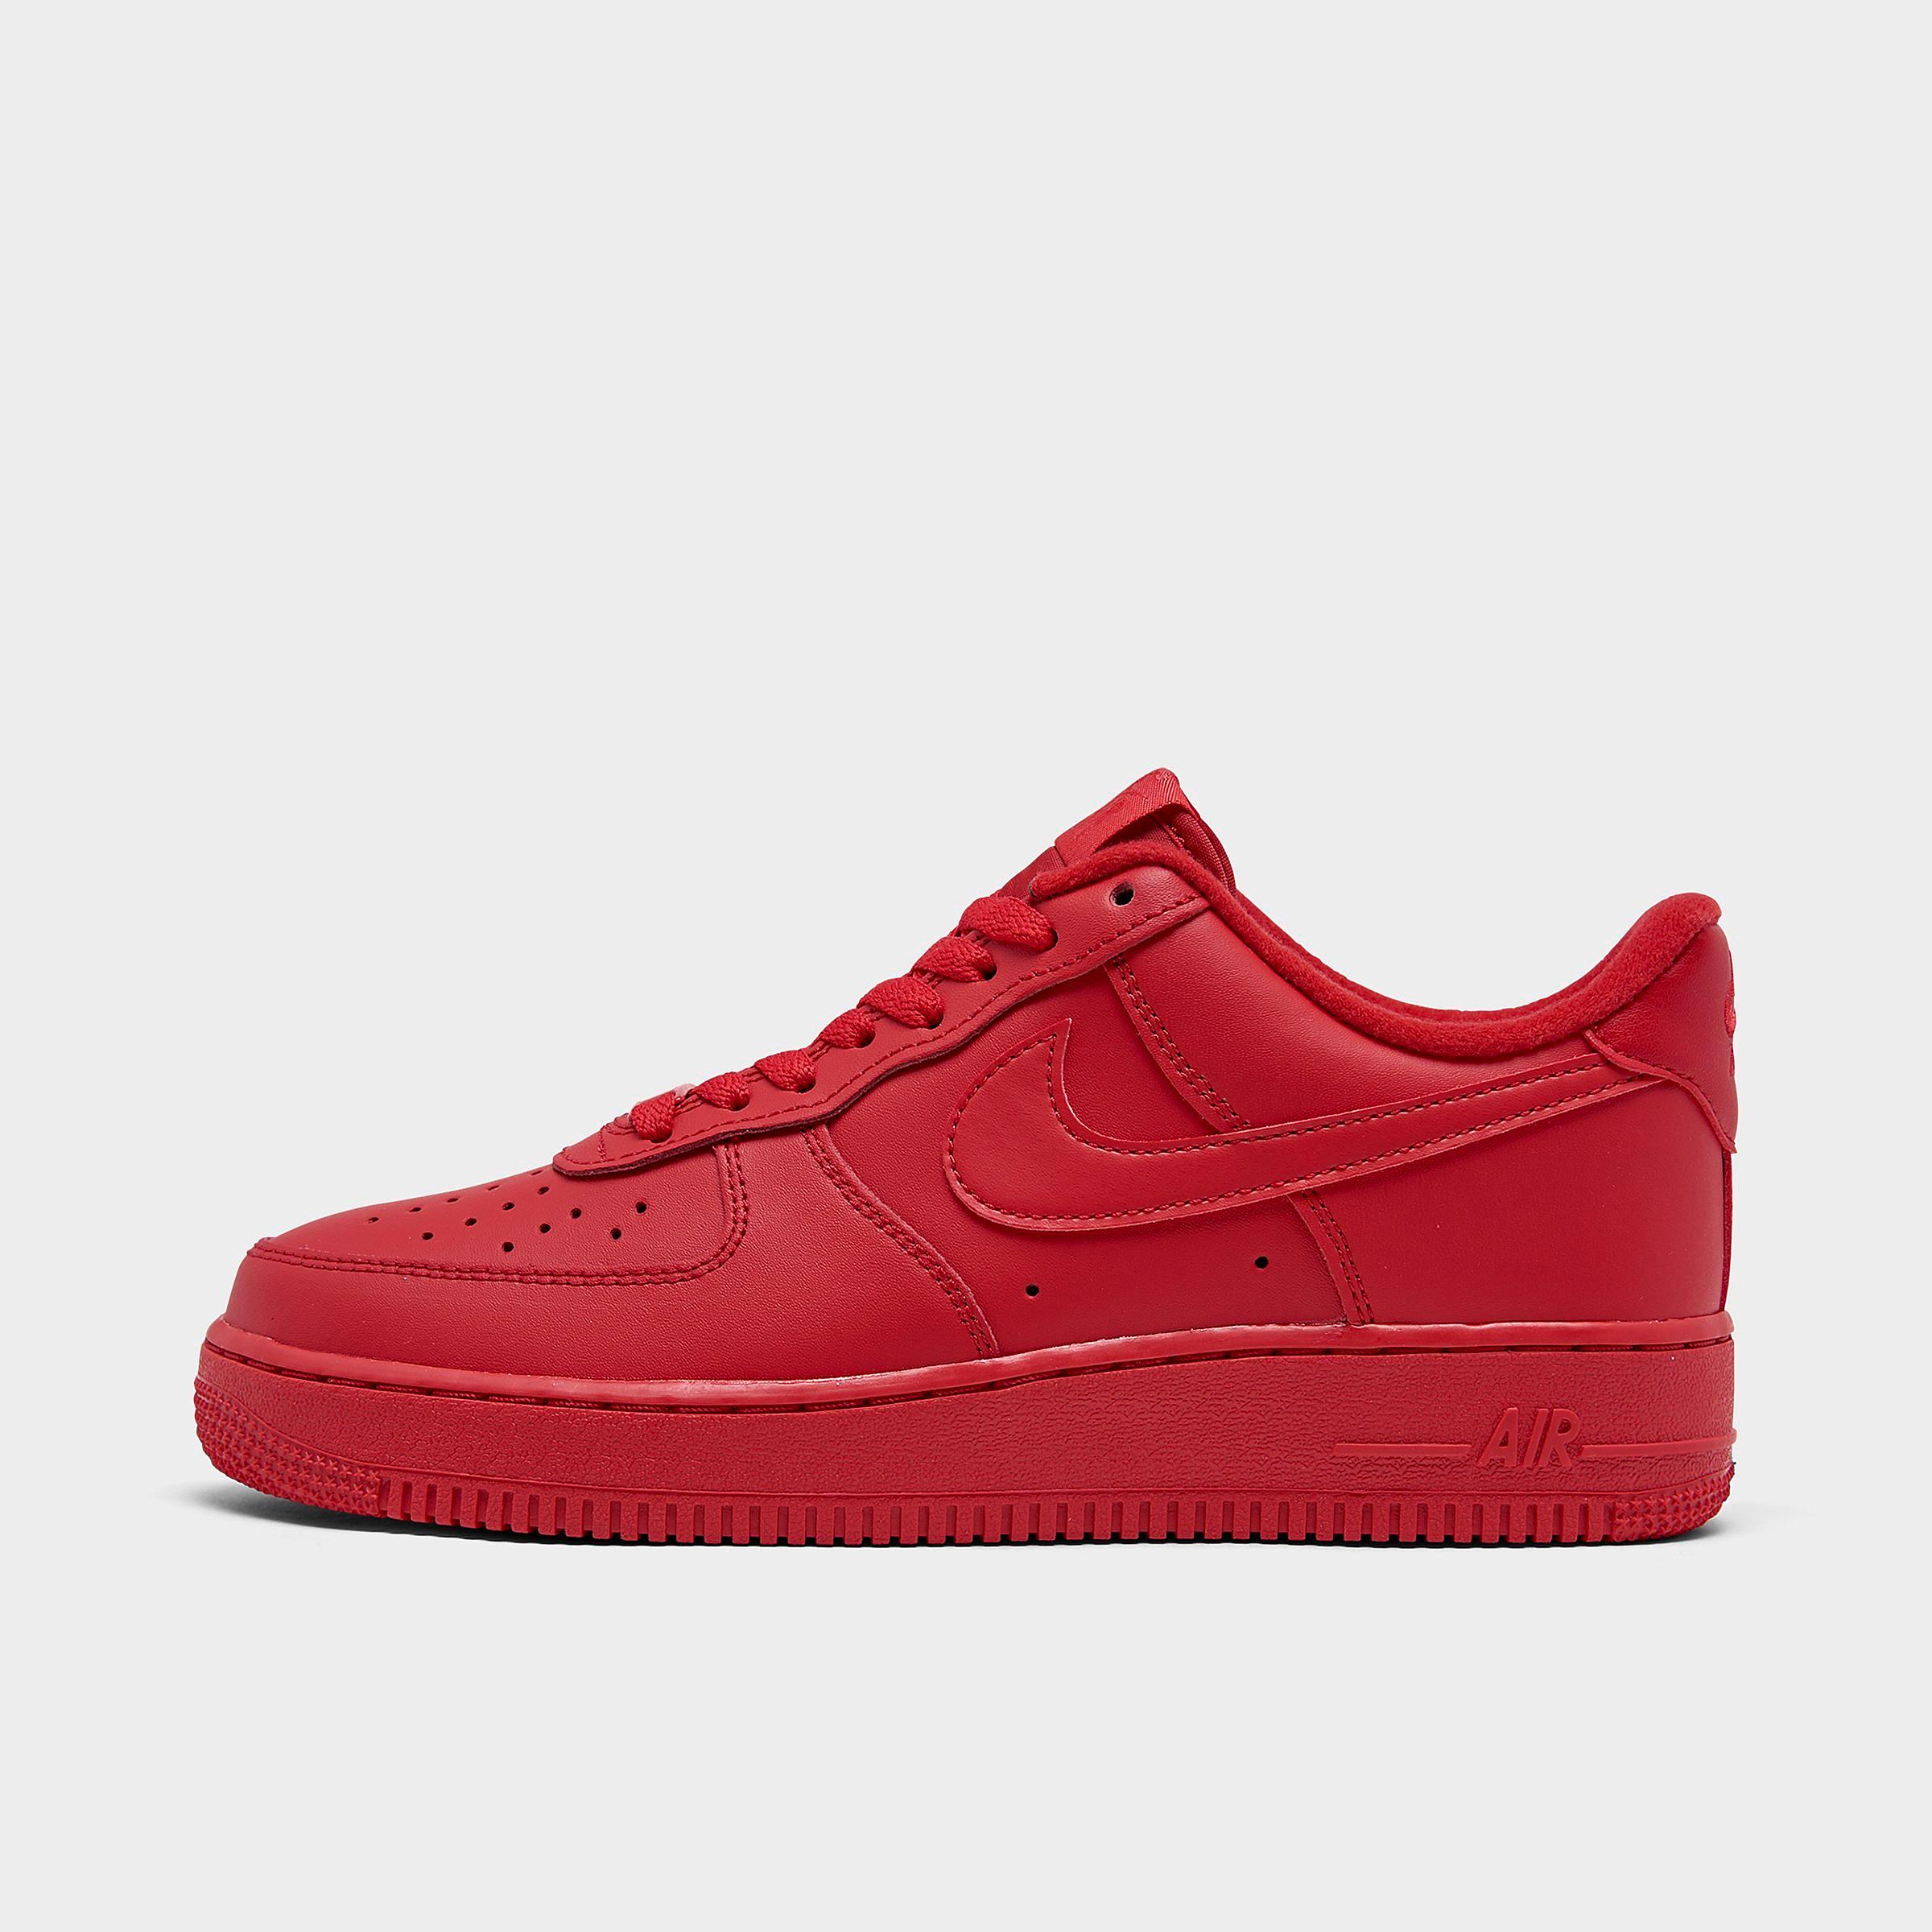 Nike Air Force 1 07 LV8 Casual Shoes